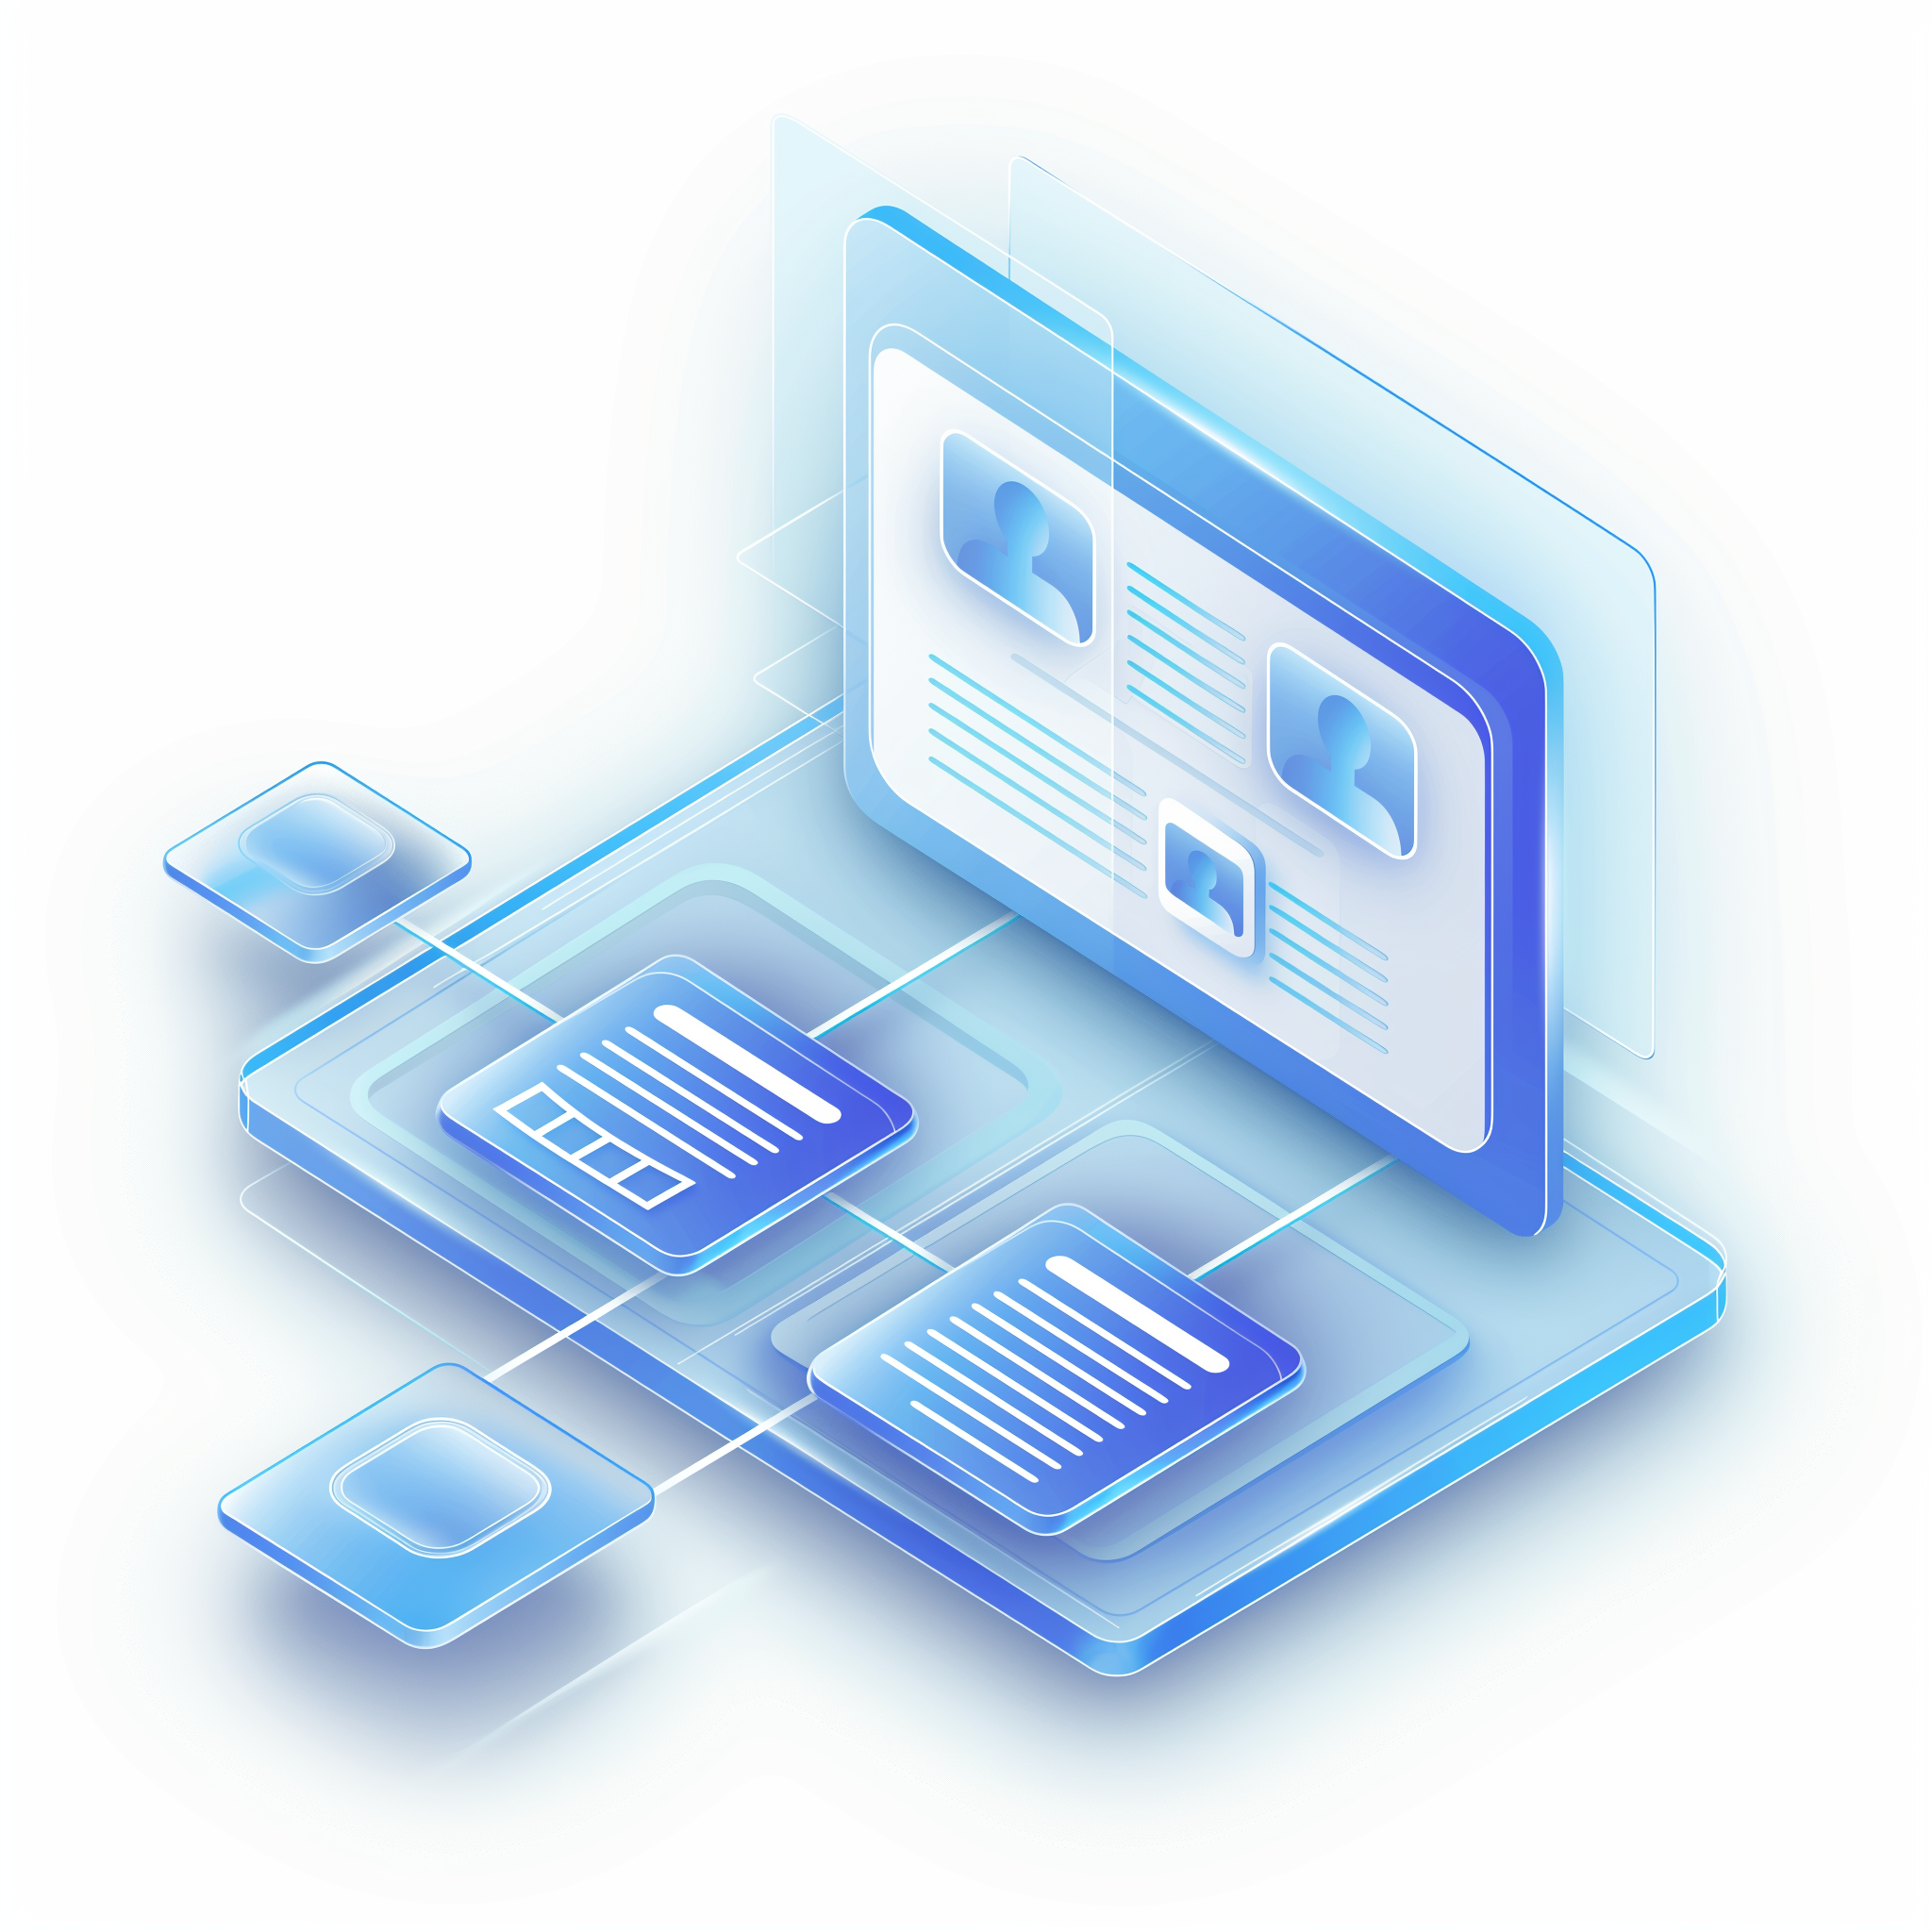 lilingxiao_33472_A_UI_icon_HR_department_office_environment_blu_8632019f-9b18-43bd-8241-720aaa10080b.png